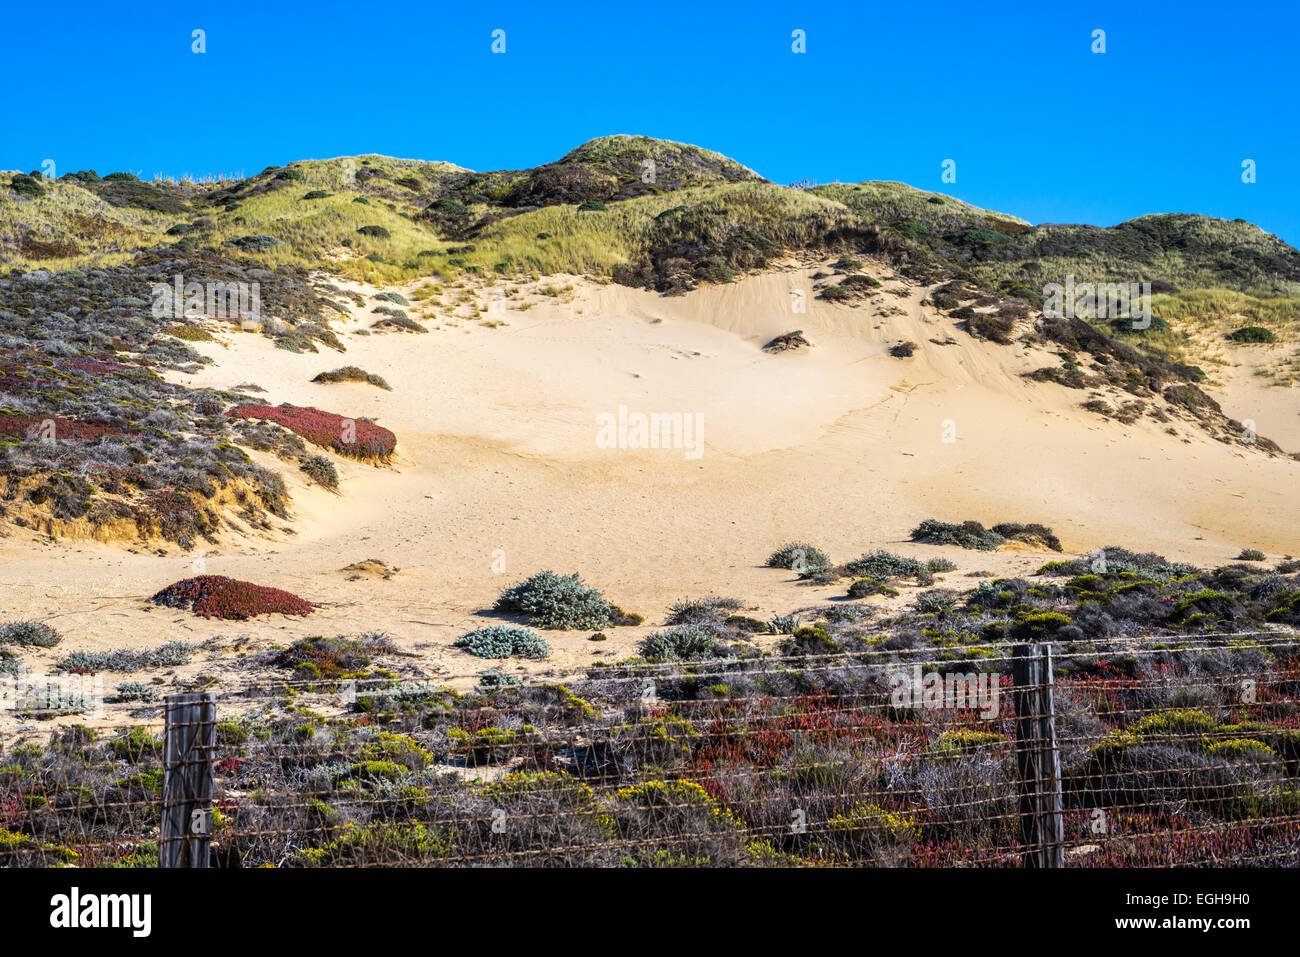 Sand dune and chaparral. California, United States. Stock Photo